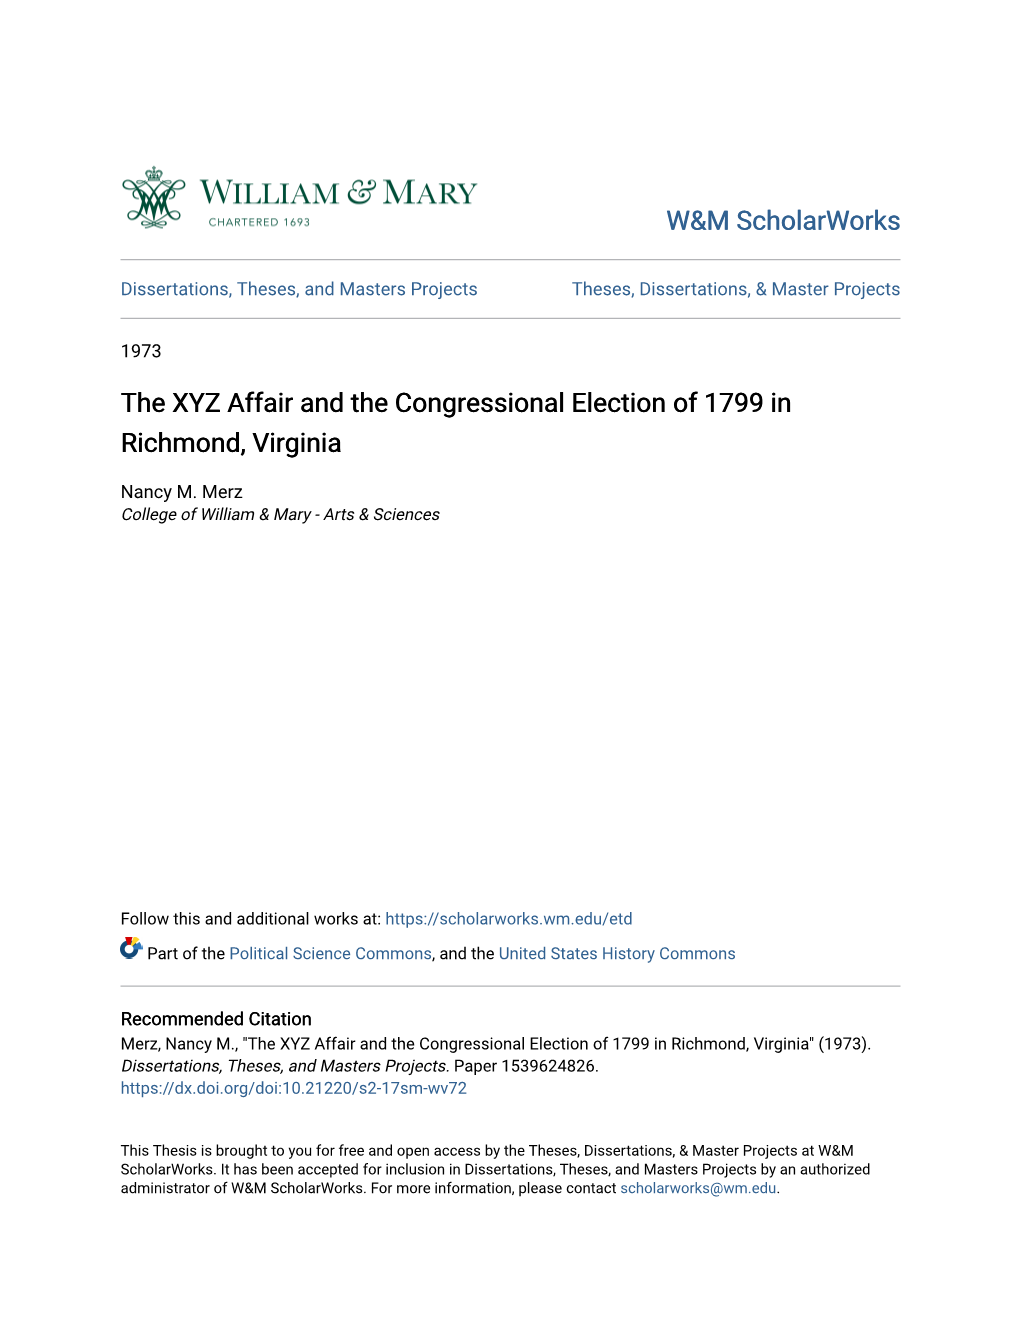 The XYZ Affair and the Congressional Election of 1799 in Richmond, Virginia